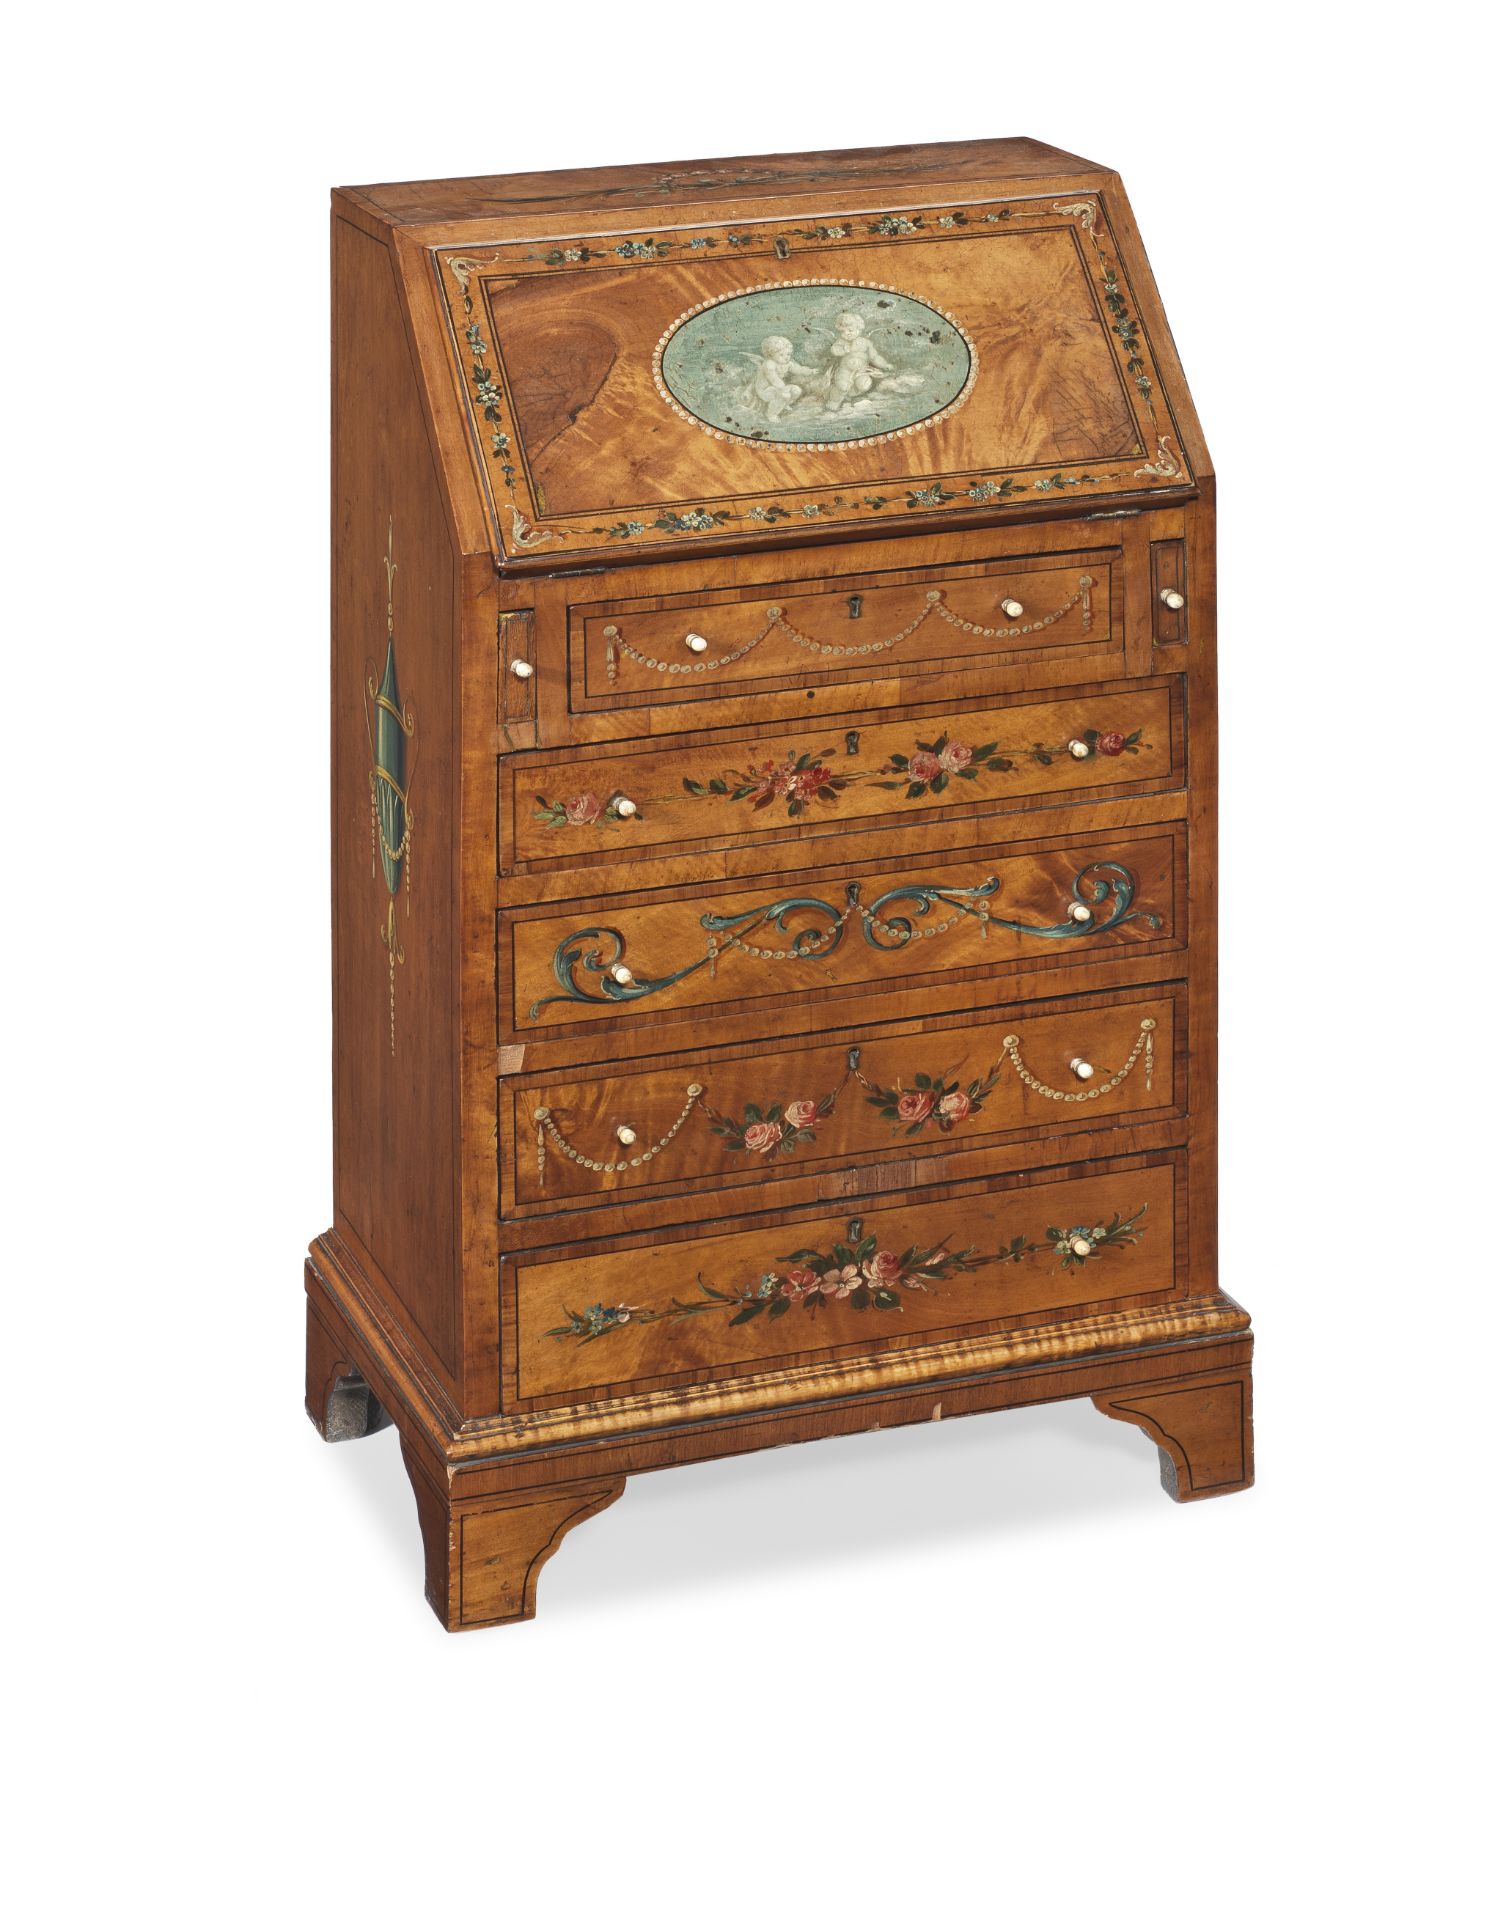 An Edwardian Sheraton revival satinwood, tulipwood crossbanded and polychrome decorated child's b...